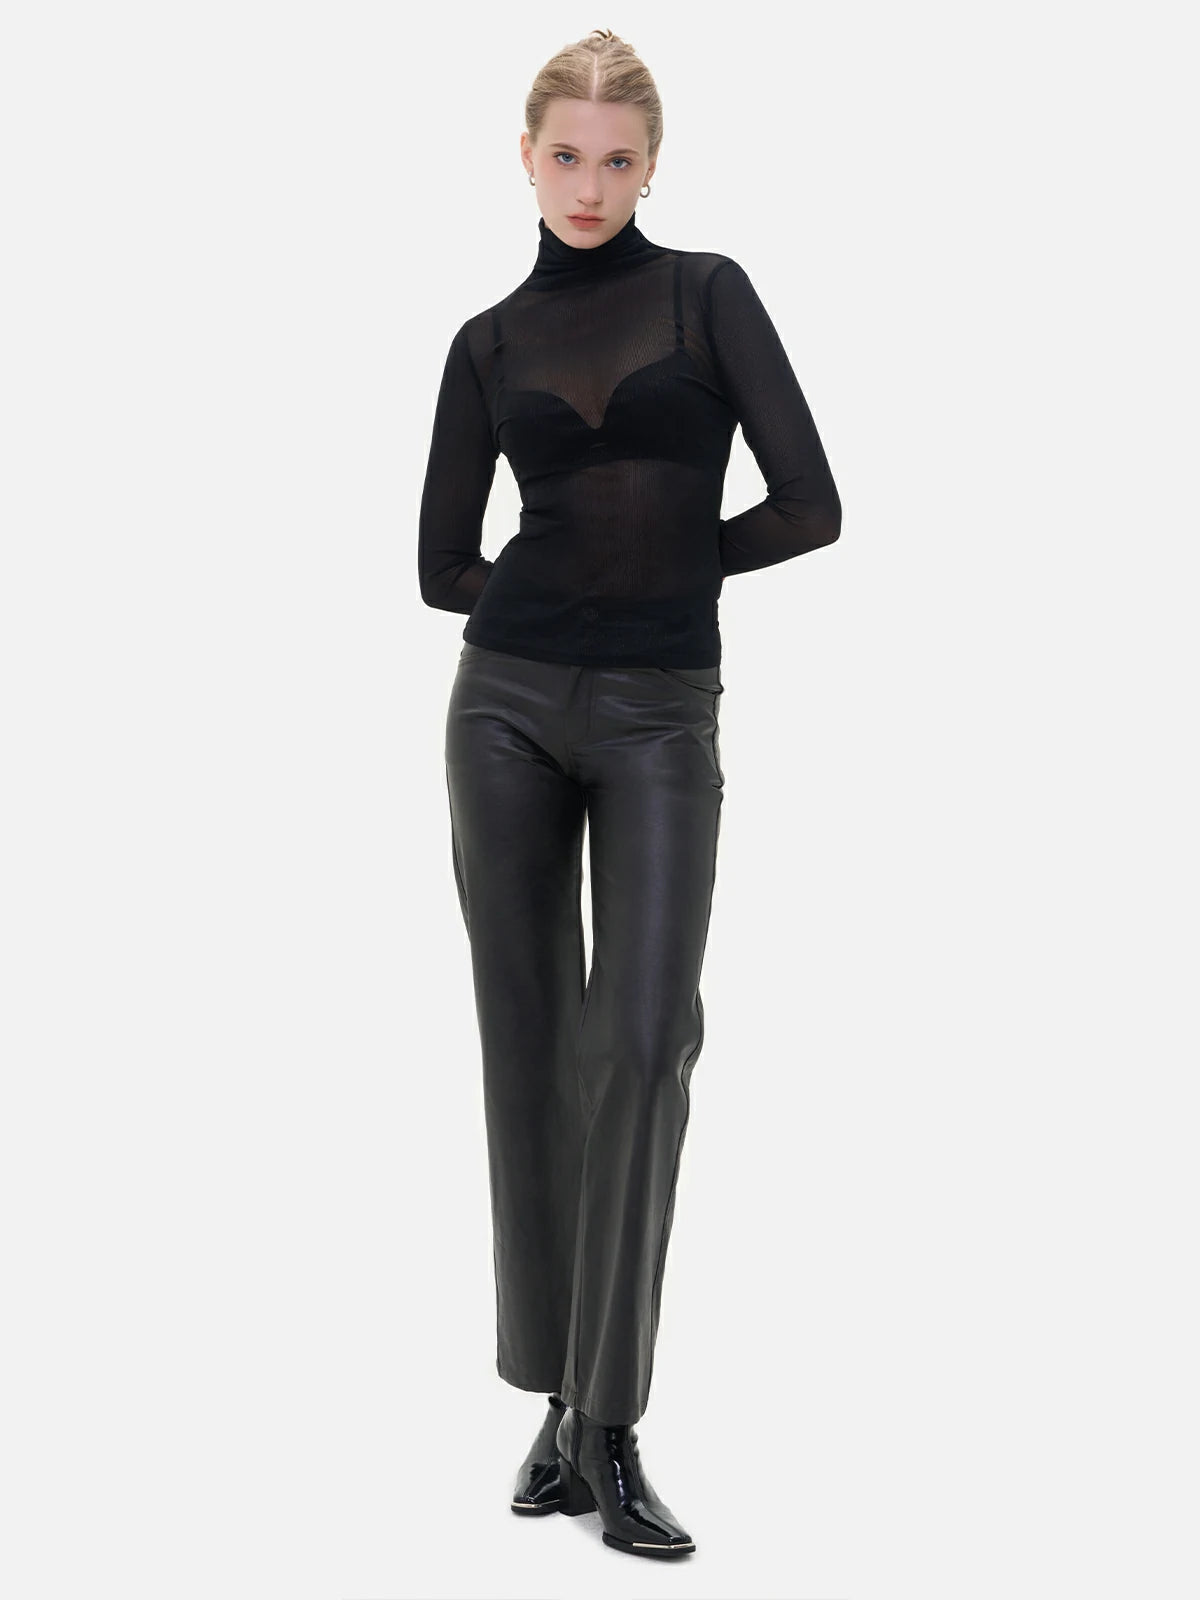 Explore the alluring world of fashion with this elegant high-neck sheer mesh top.